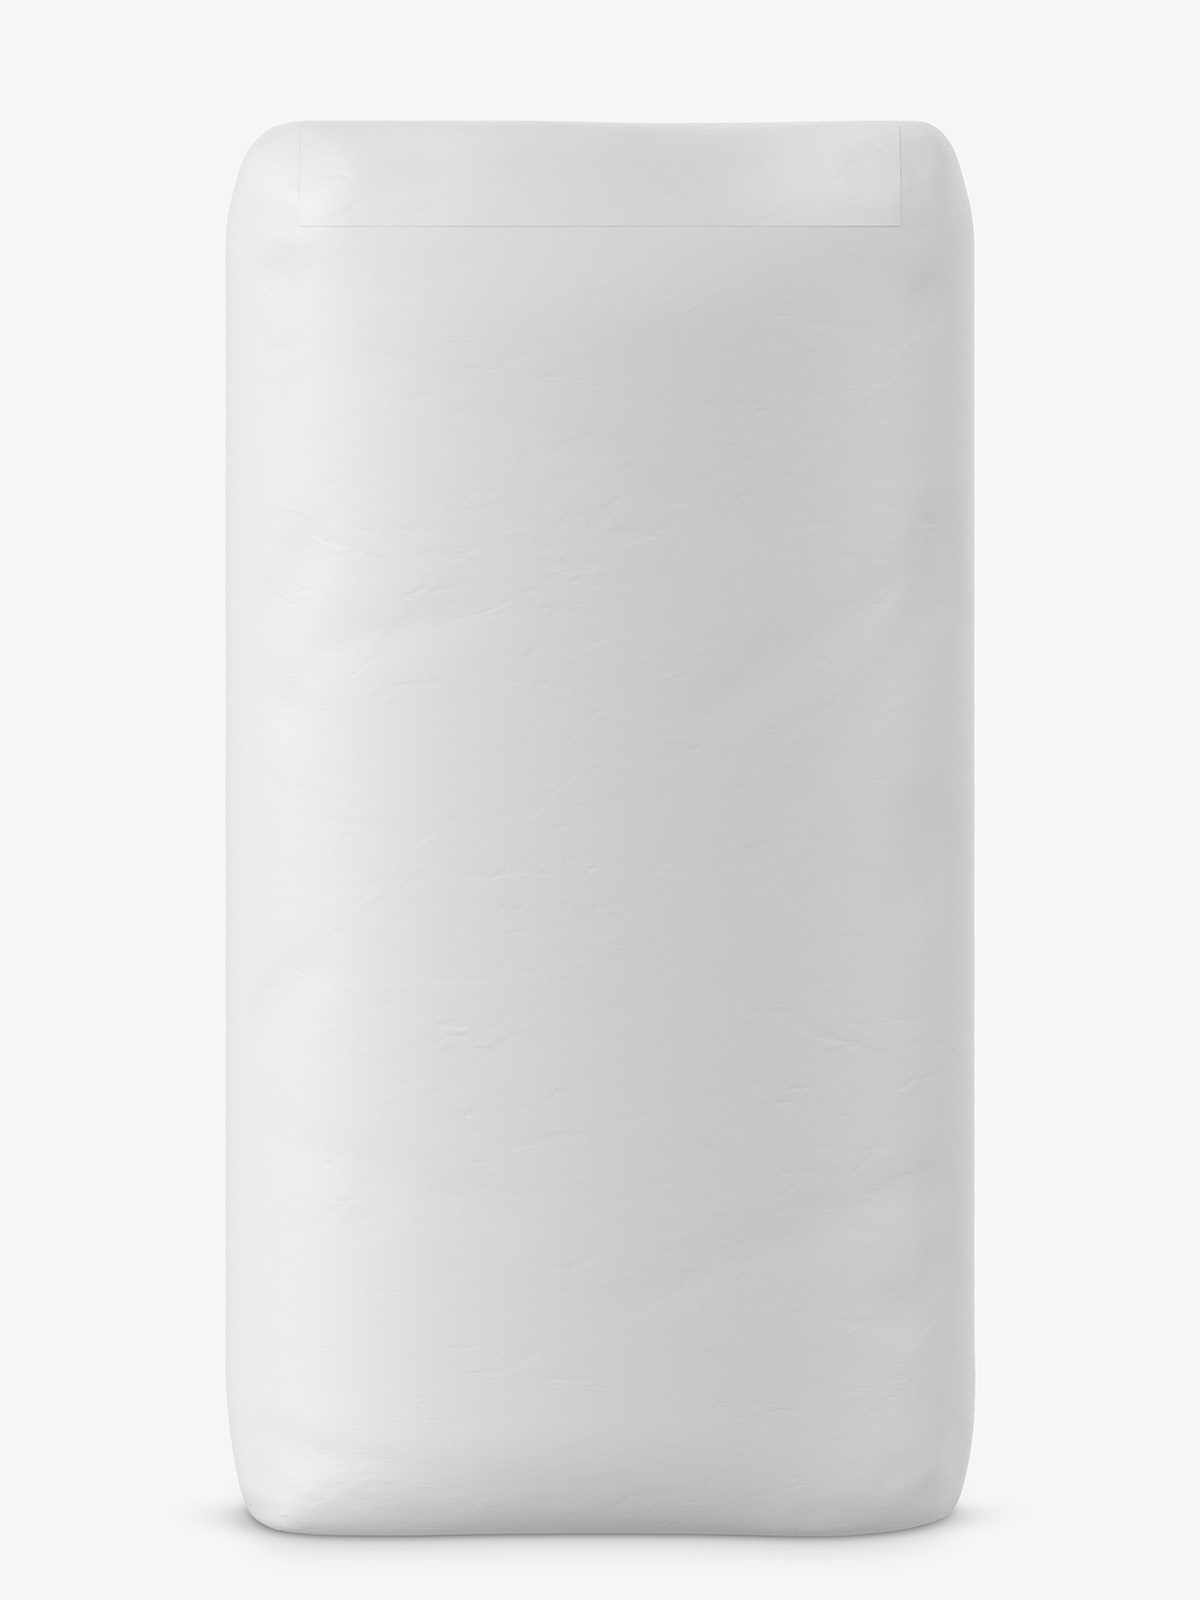 Download Get Cement Bag Mockup Free Download Pics Yellowimages ...